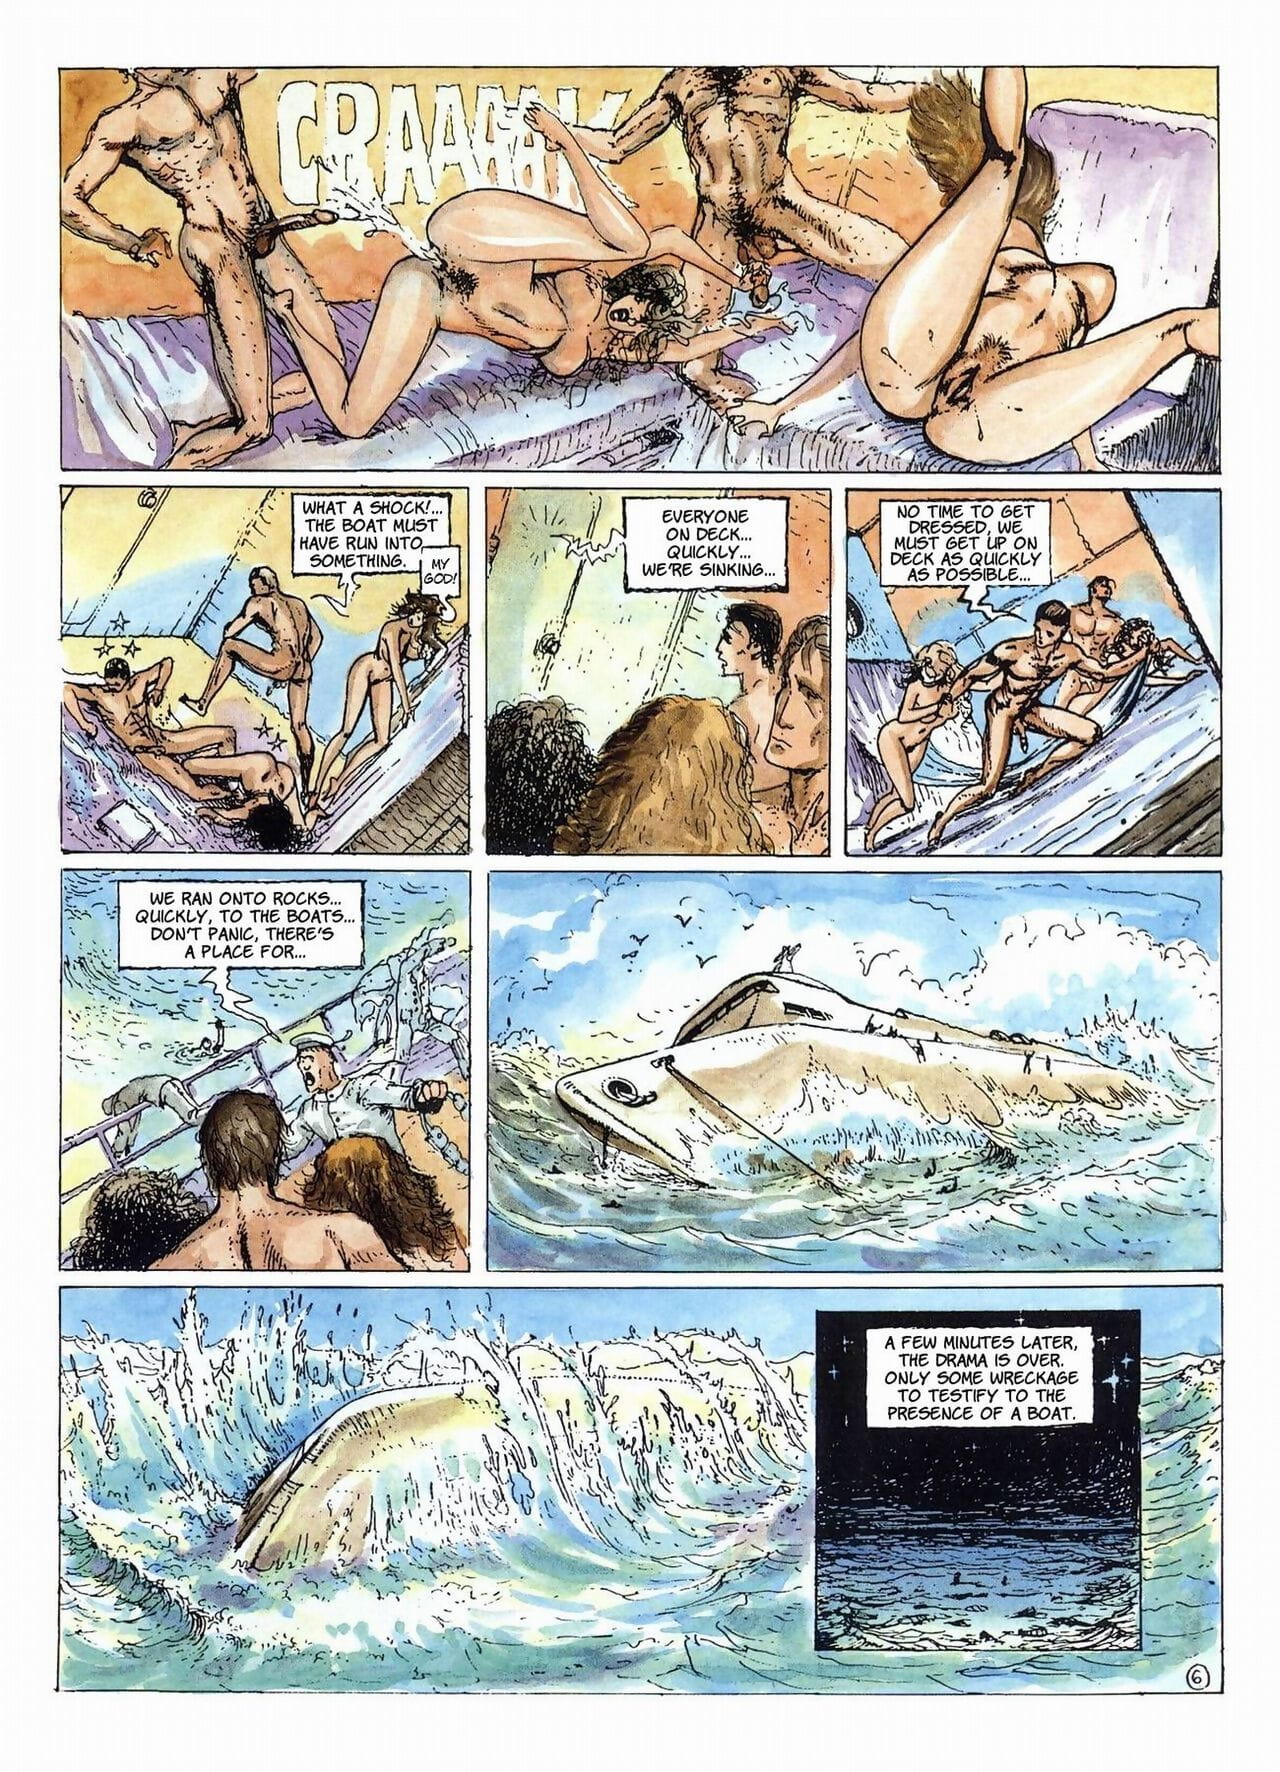 The Island Of Perversions page 1